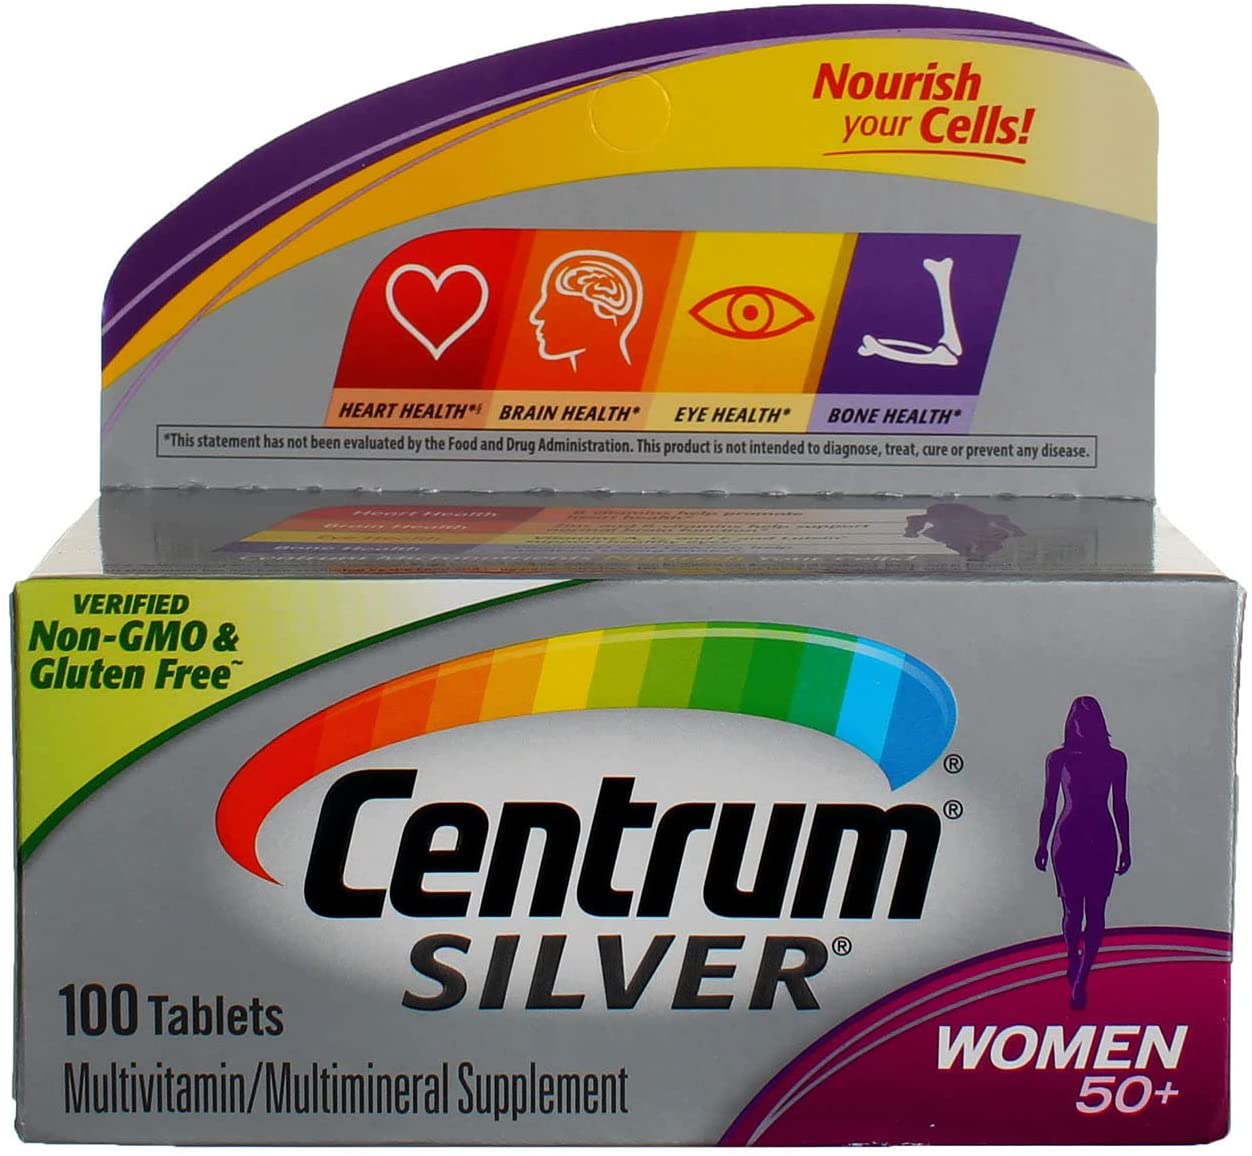 Centrum Silver Multivitamin/Multimineral Supplement Tablets for Women 50+ Age, Pack of 2 - 100 Count